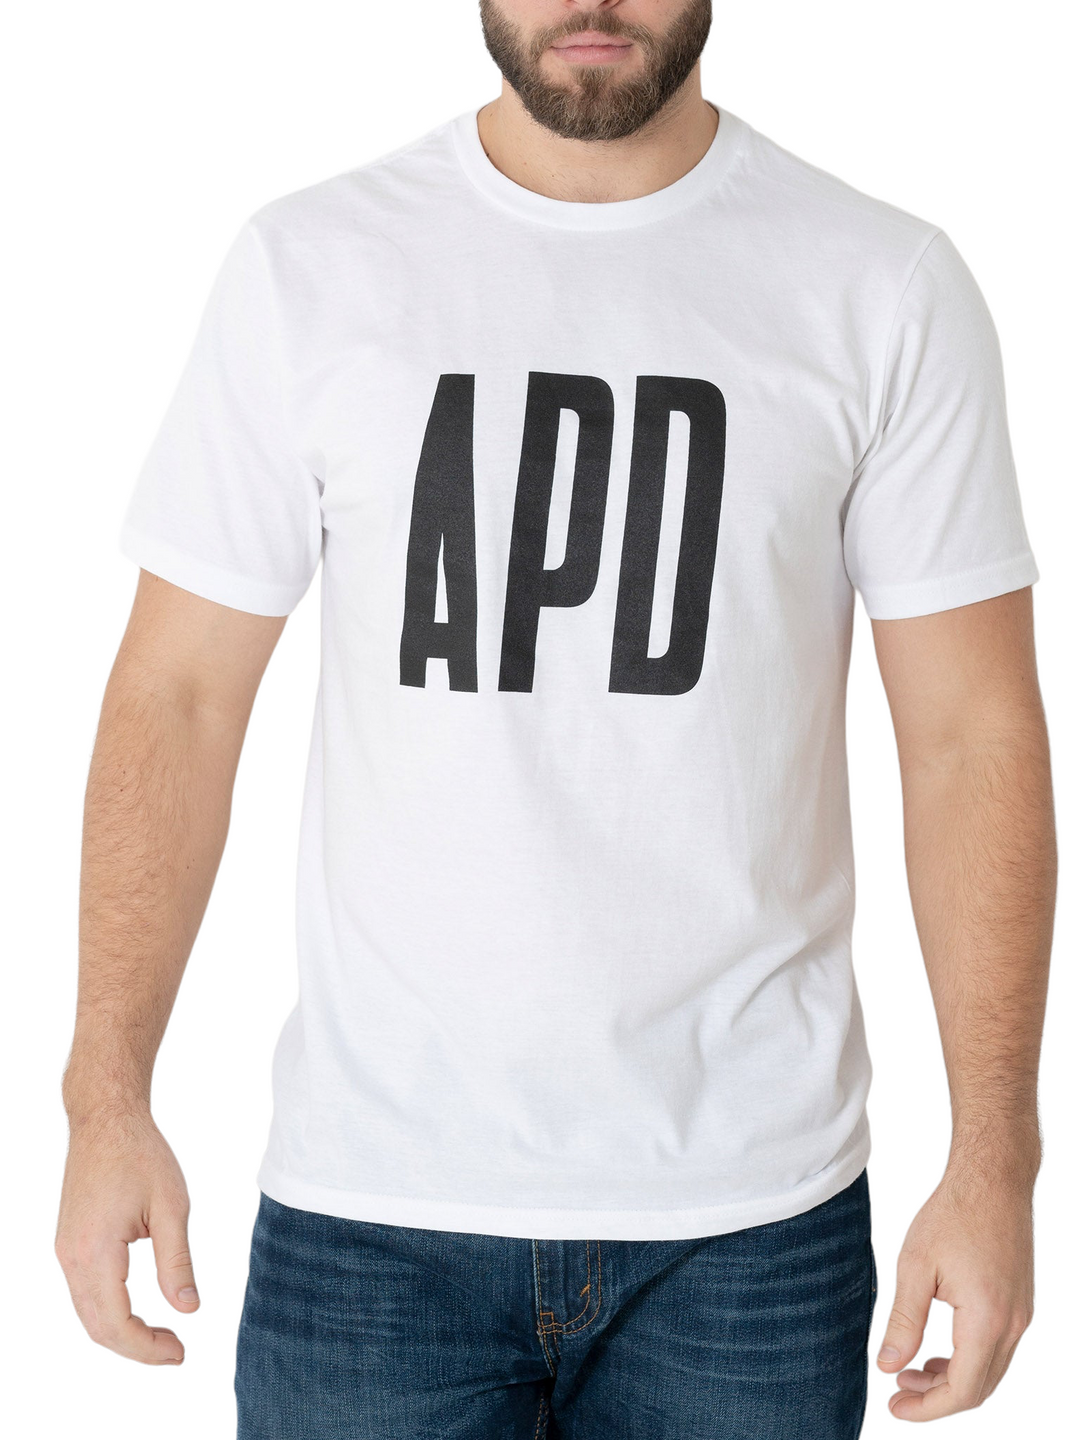 Tee Shirt with Classic APD Logo